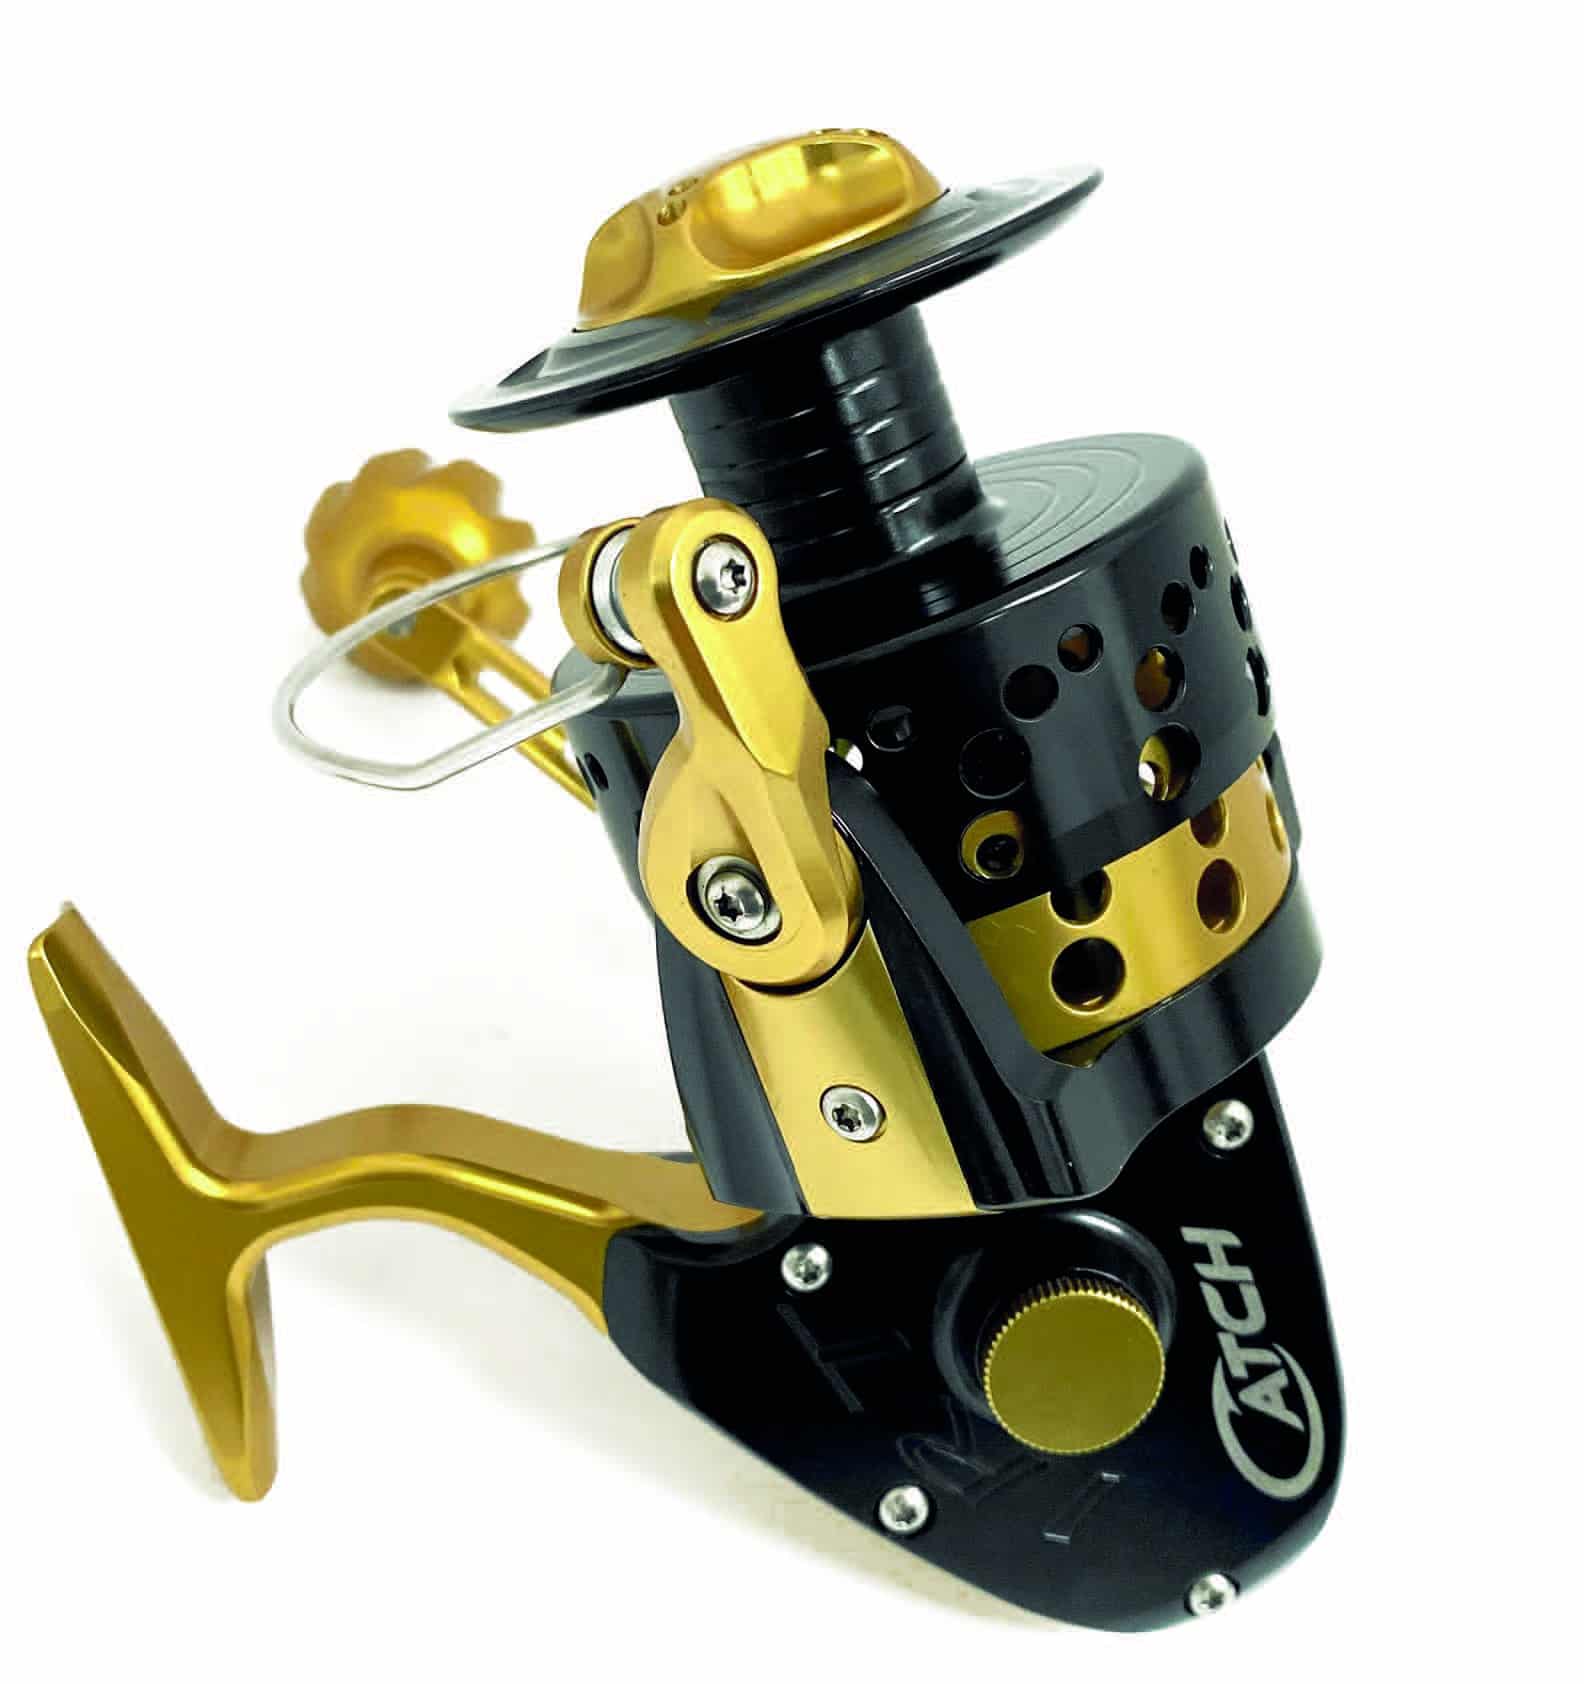 Catch IRT800DD Spinning Reel Black and Gold, CLICK HERE